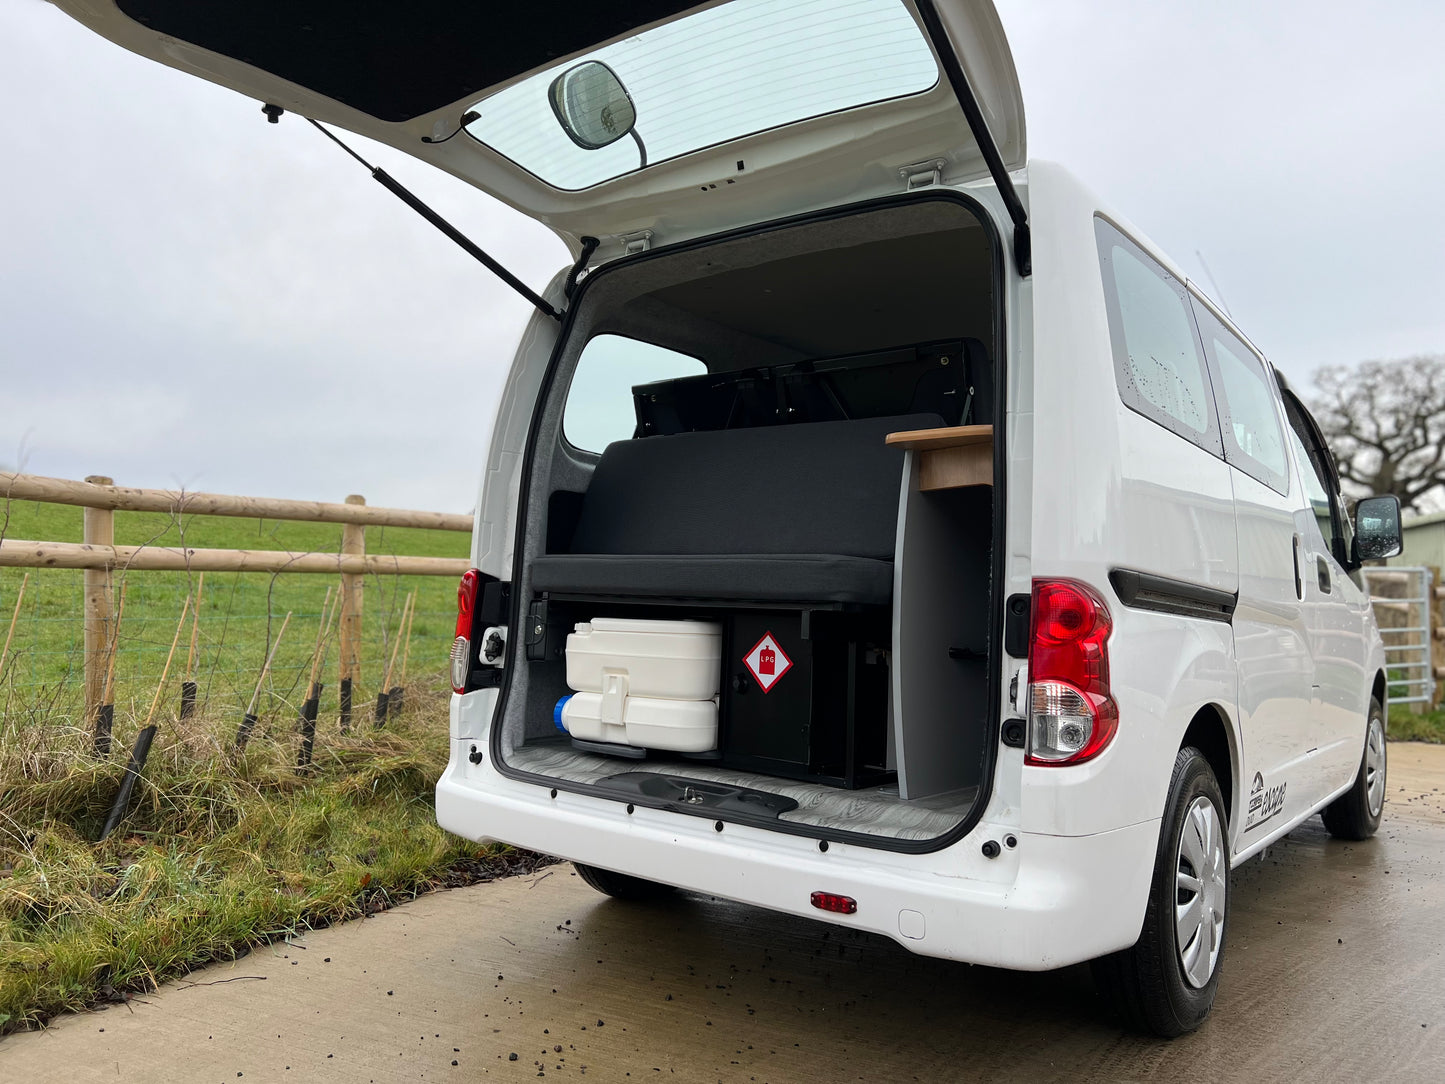 CCCAMPERS Escape Camper Conversion for Nissan NV200 & eNV200, Maxus eDeliver 3 also the XS wheelbase Peugeot Expert, Citroen Dispatch and Toyota Proace